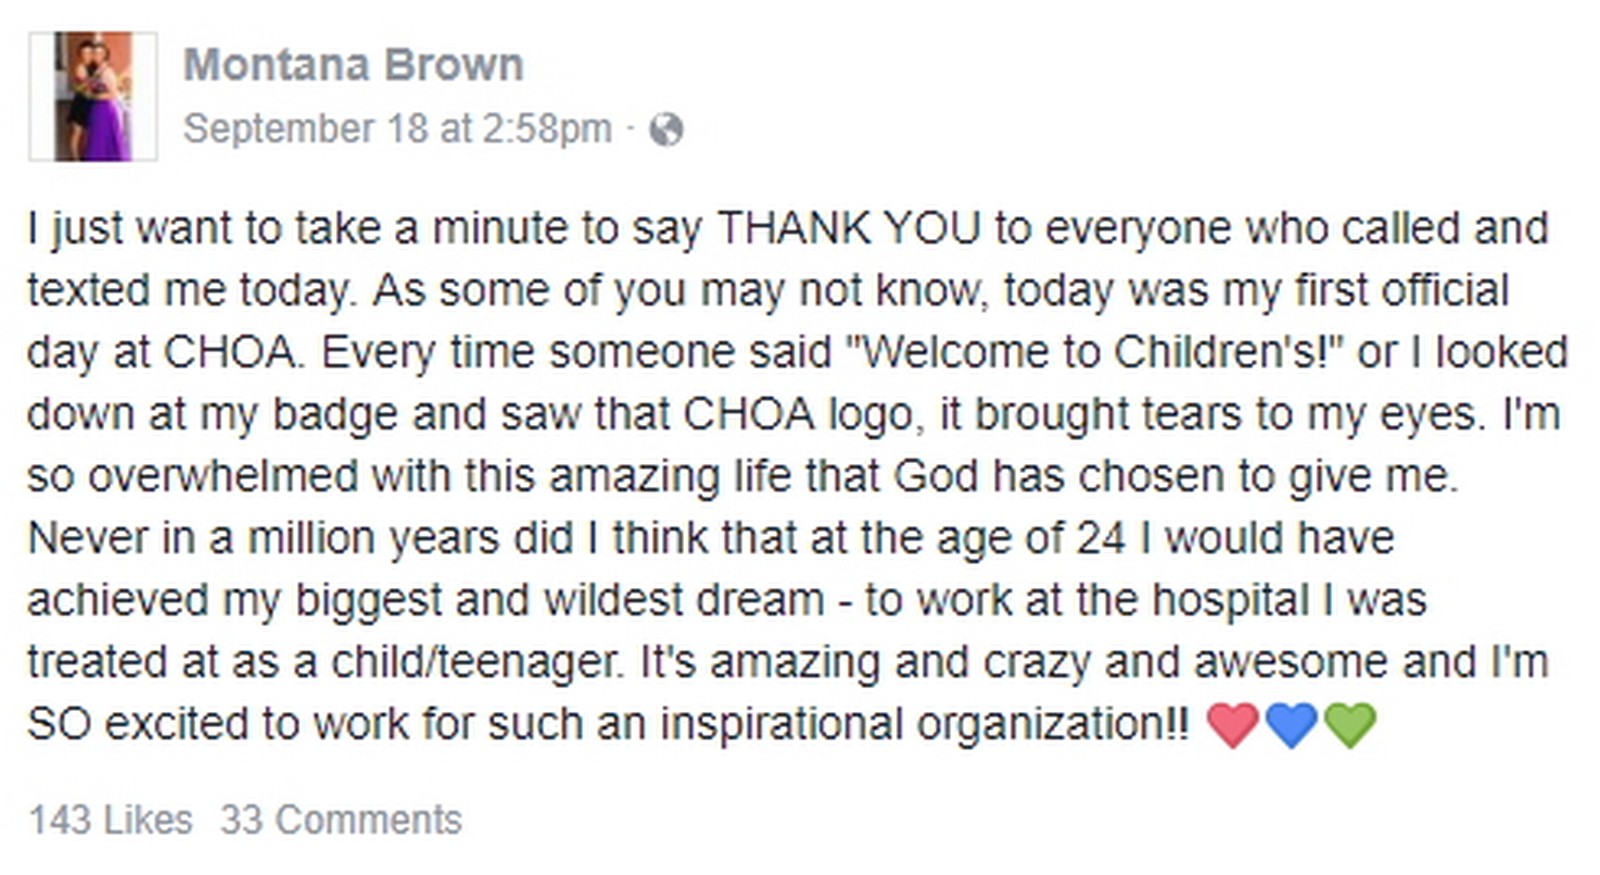 Montana Brown couldn't be happier and thankful to God and everyone in her life for helping her fulfill her dreams.